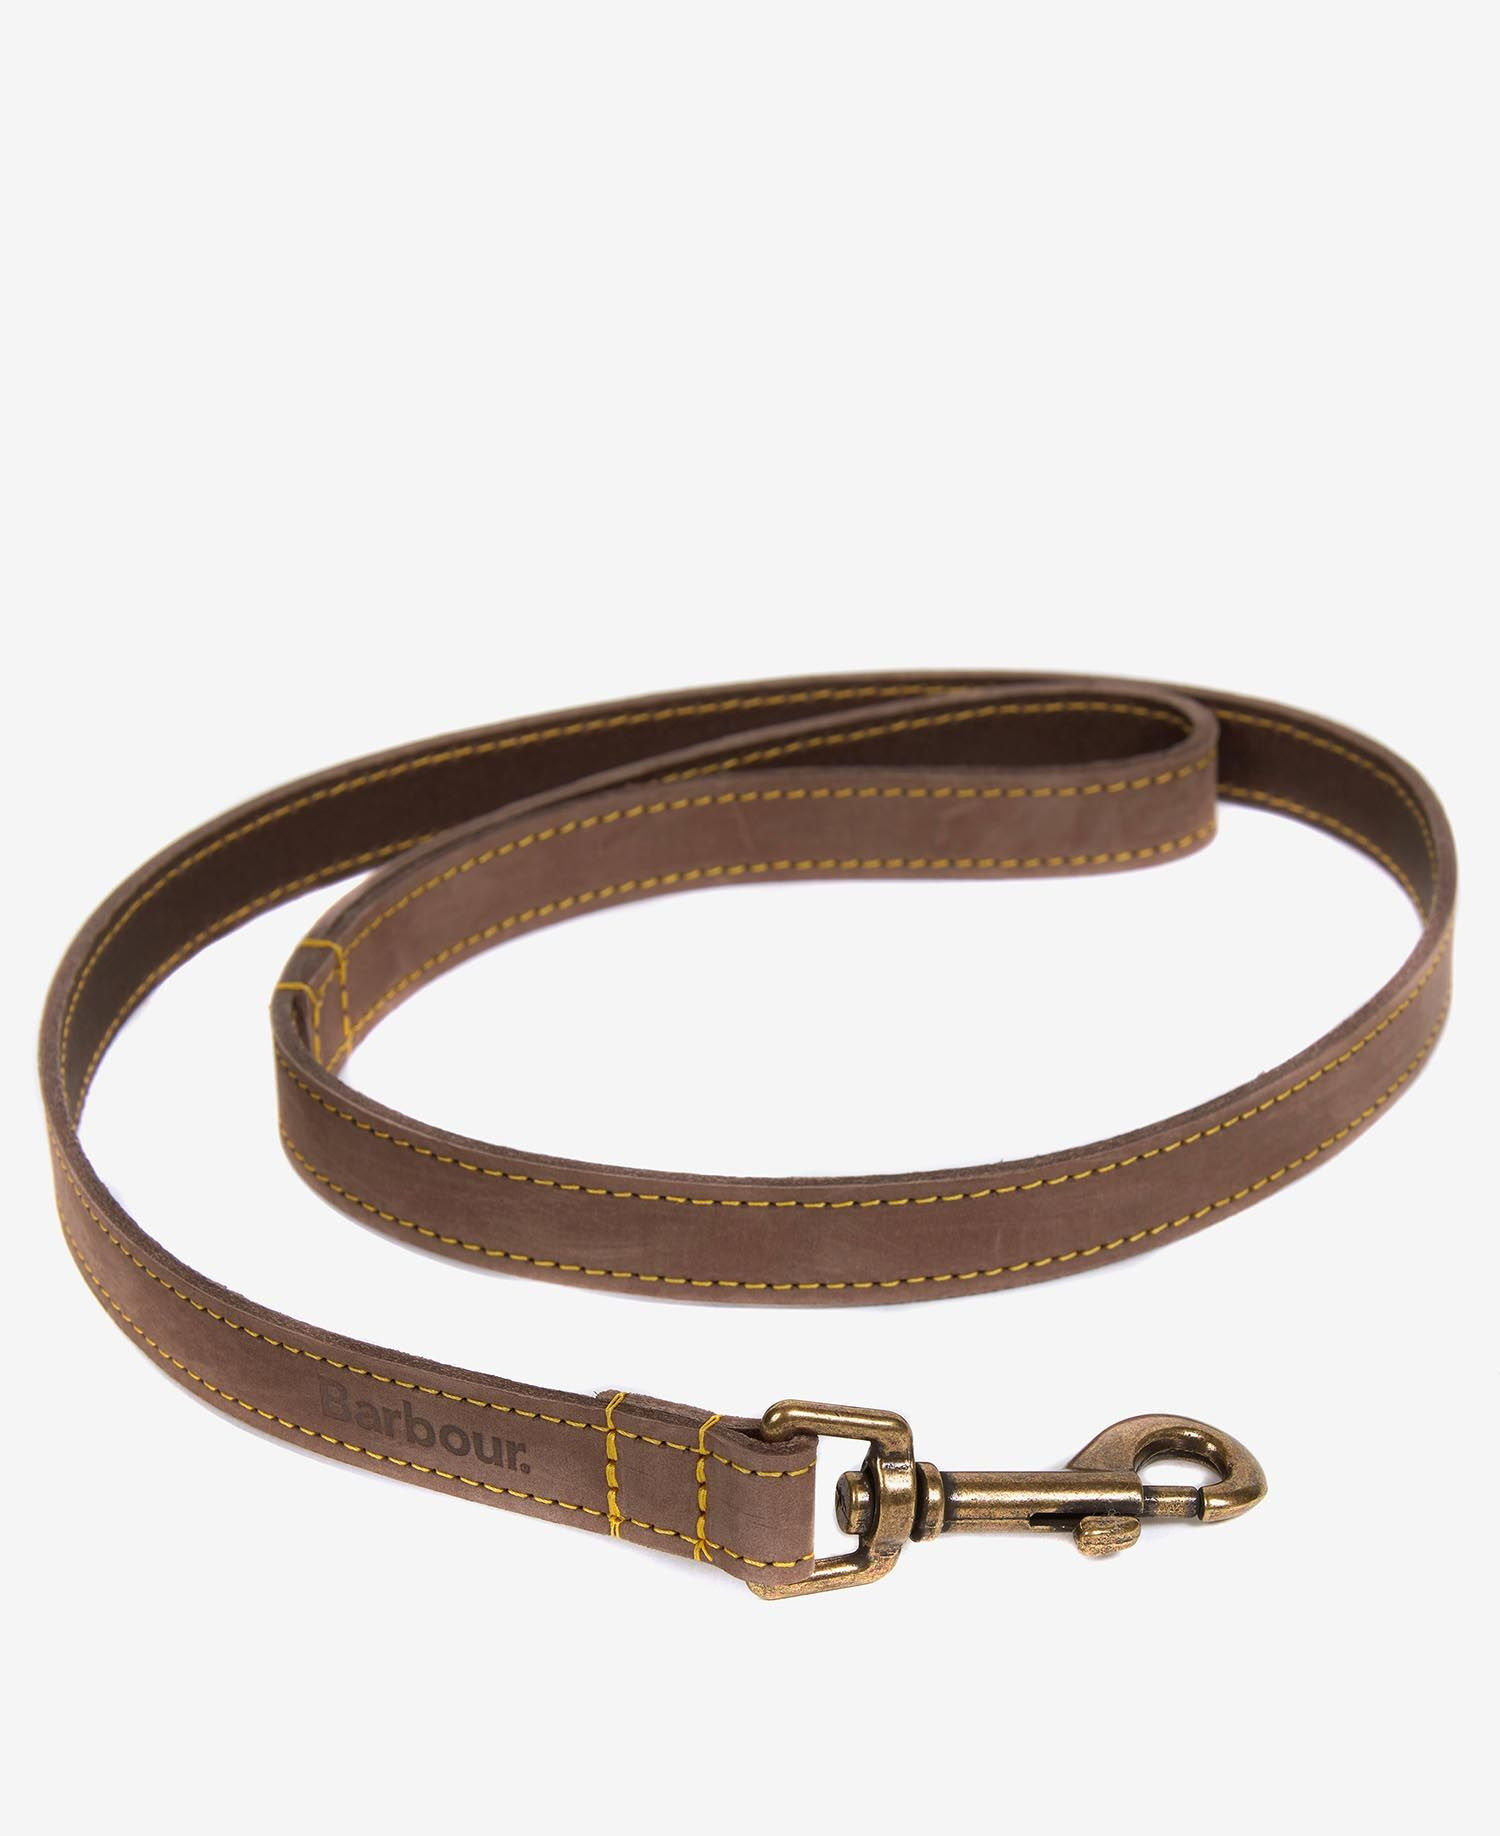 Barbour Leather Dog Lead - Hundesnore | Hardloop